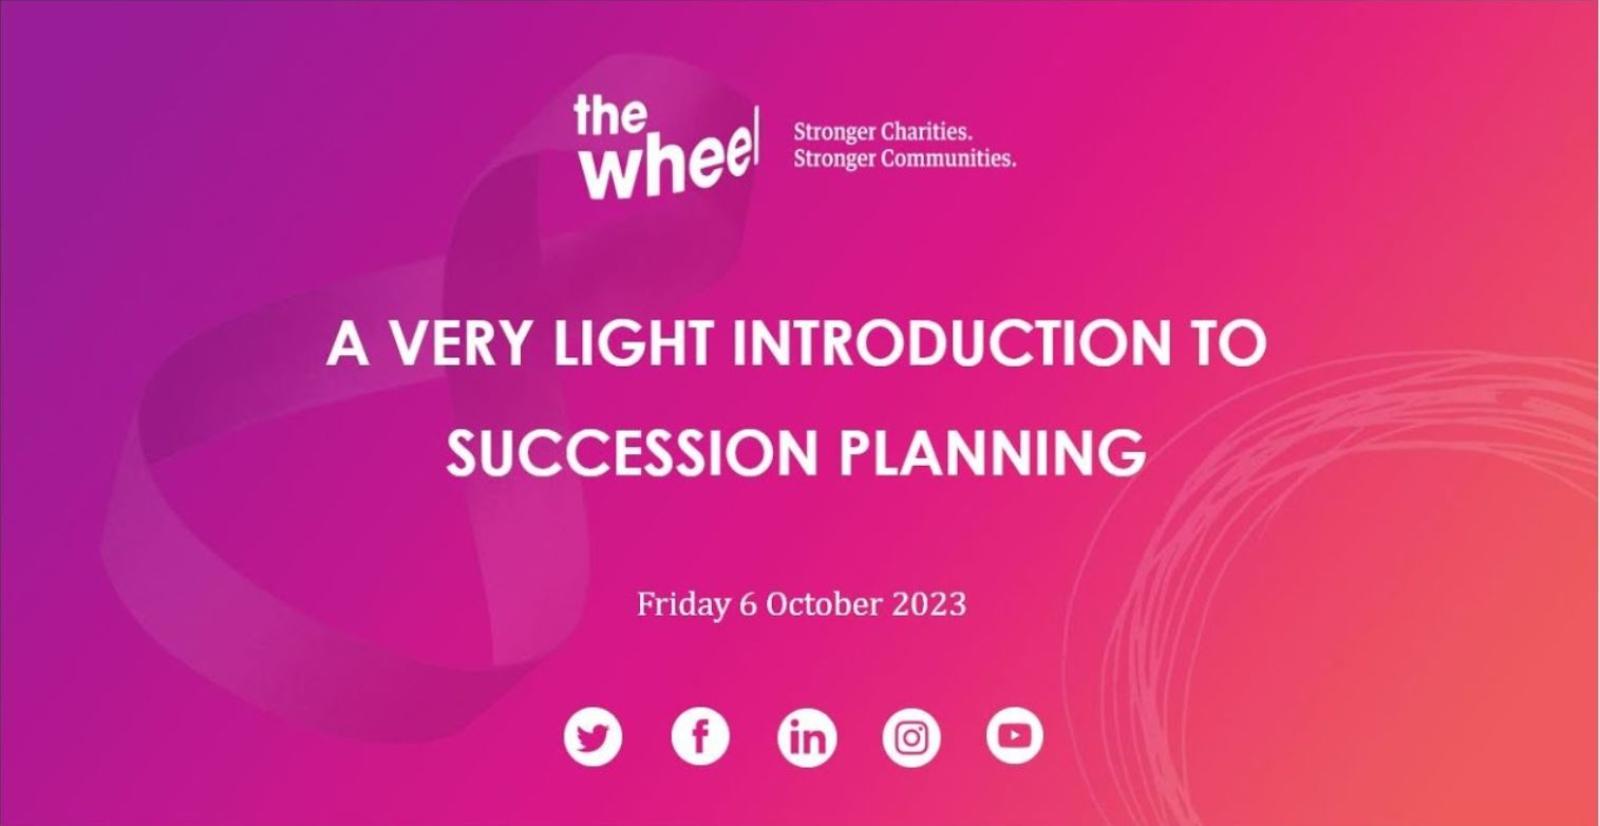 An Introduction to Succession Planning (6 October)